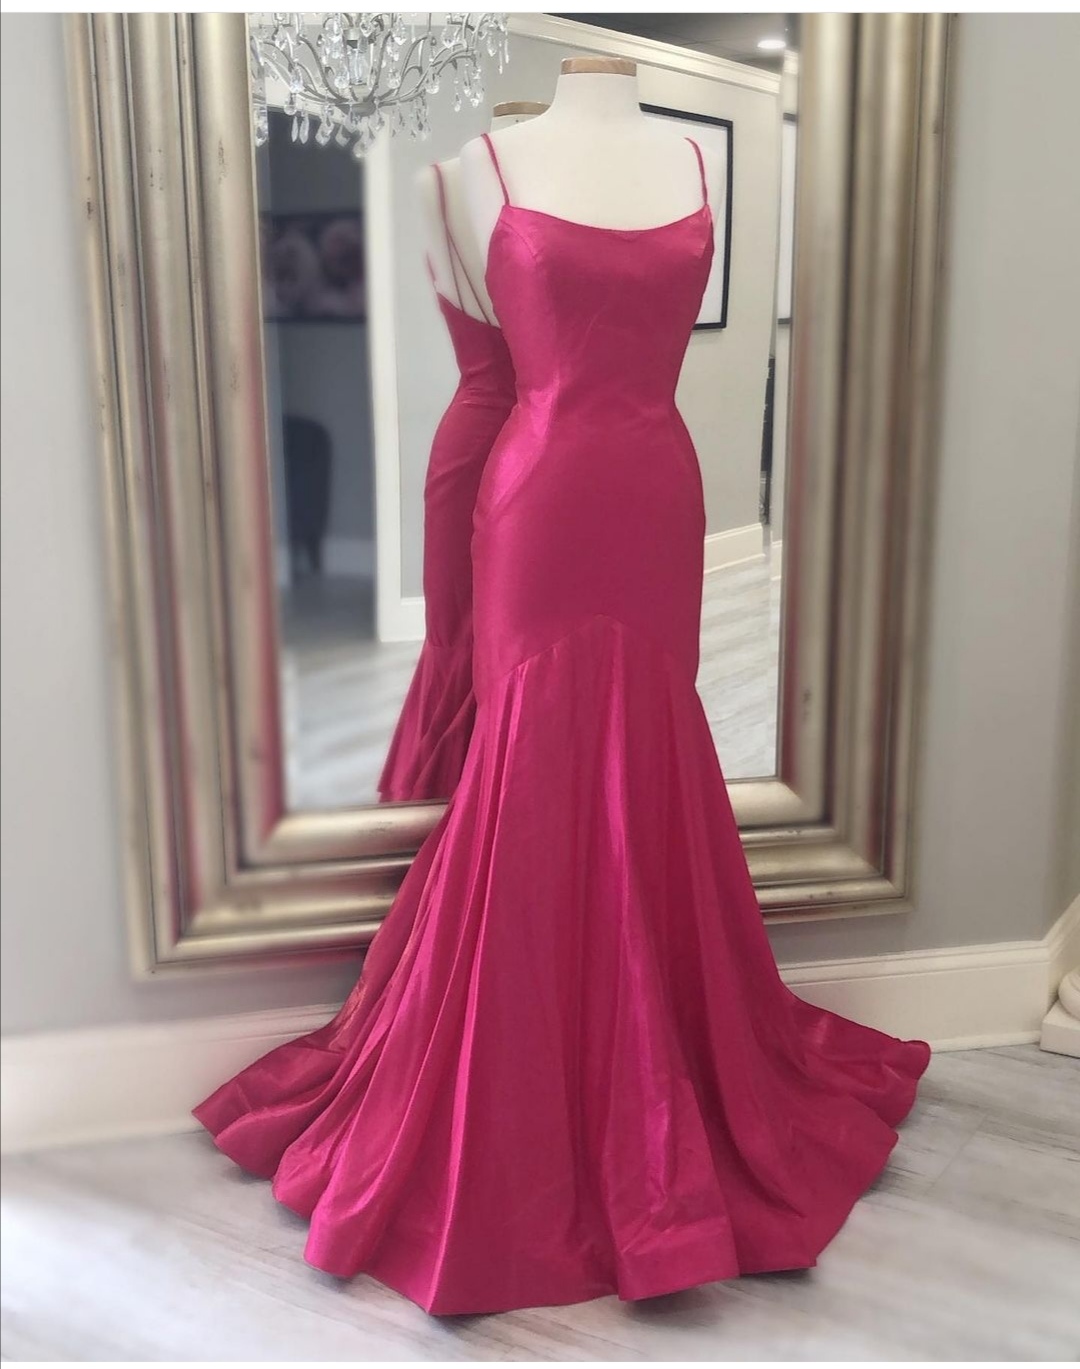 Scoop Neck Long Mermaid Prom Dress For Special Occasion